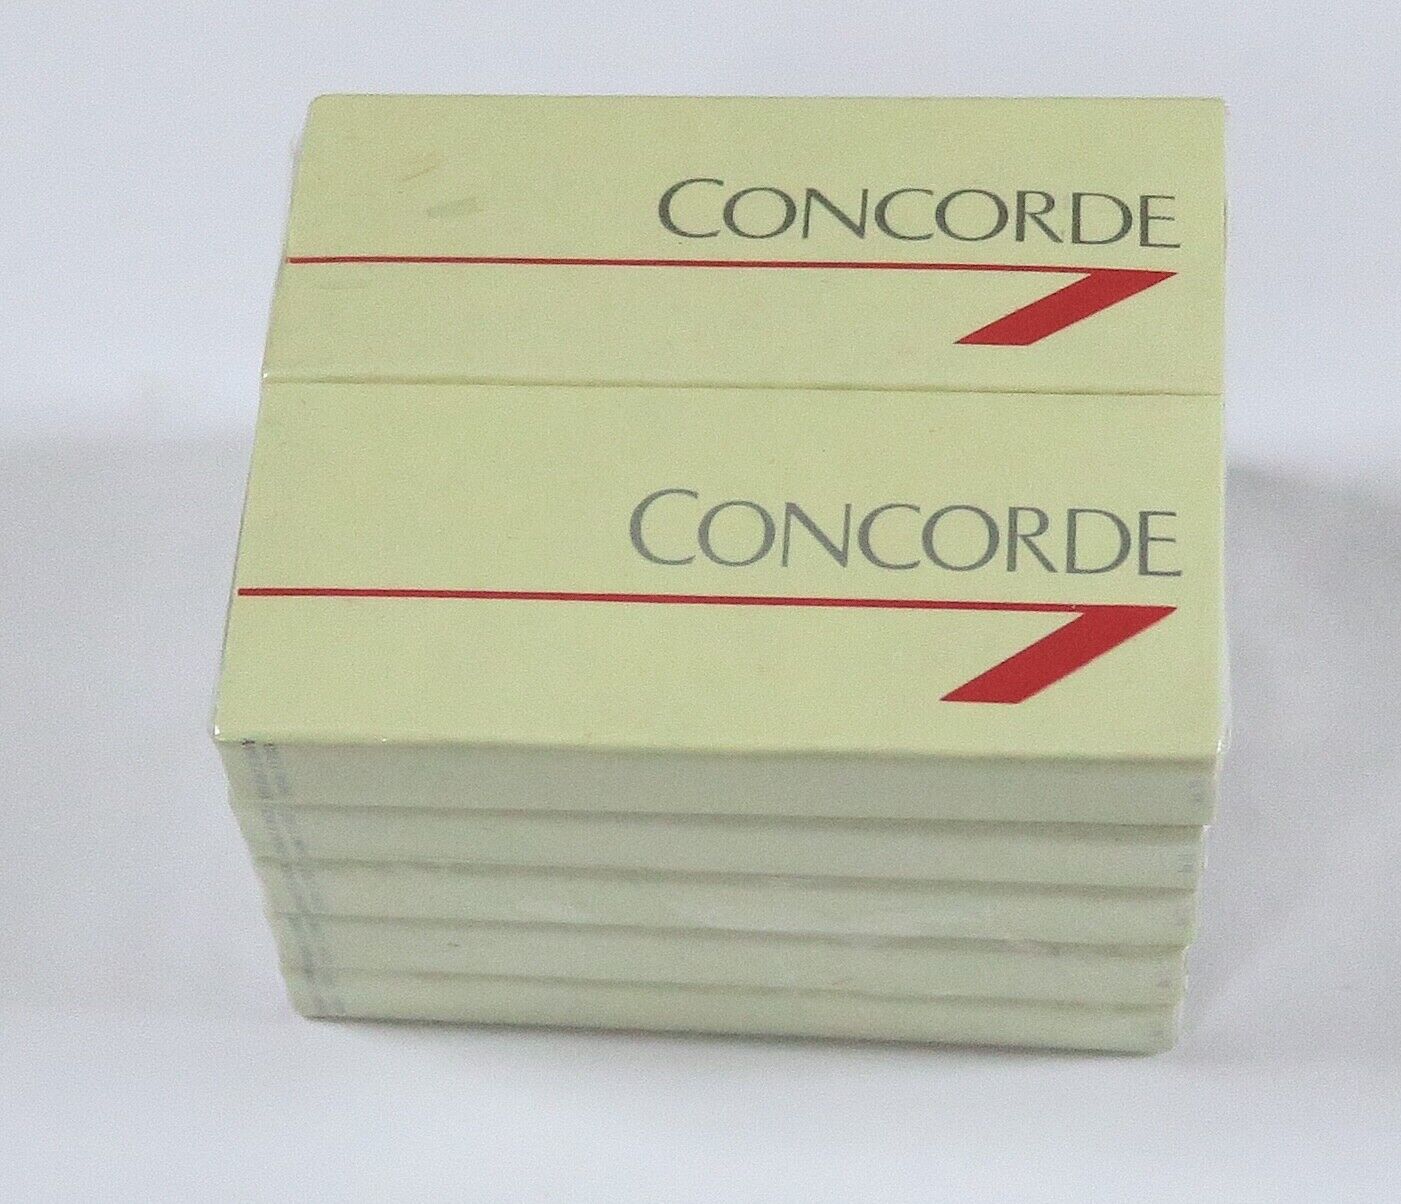 Vintage Collectable Concorde Match Boxes matches x 10 sealed 23x55x6mm